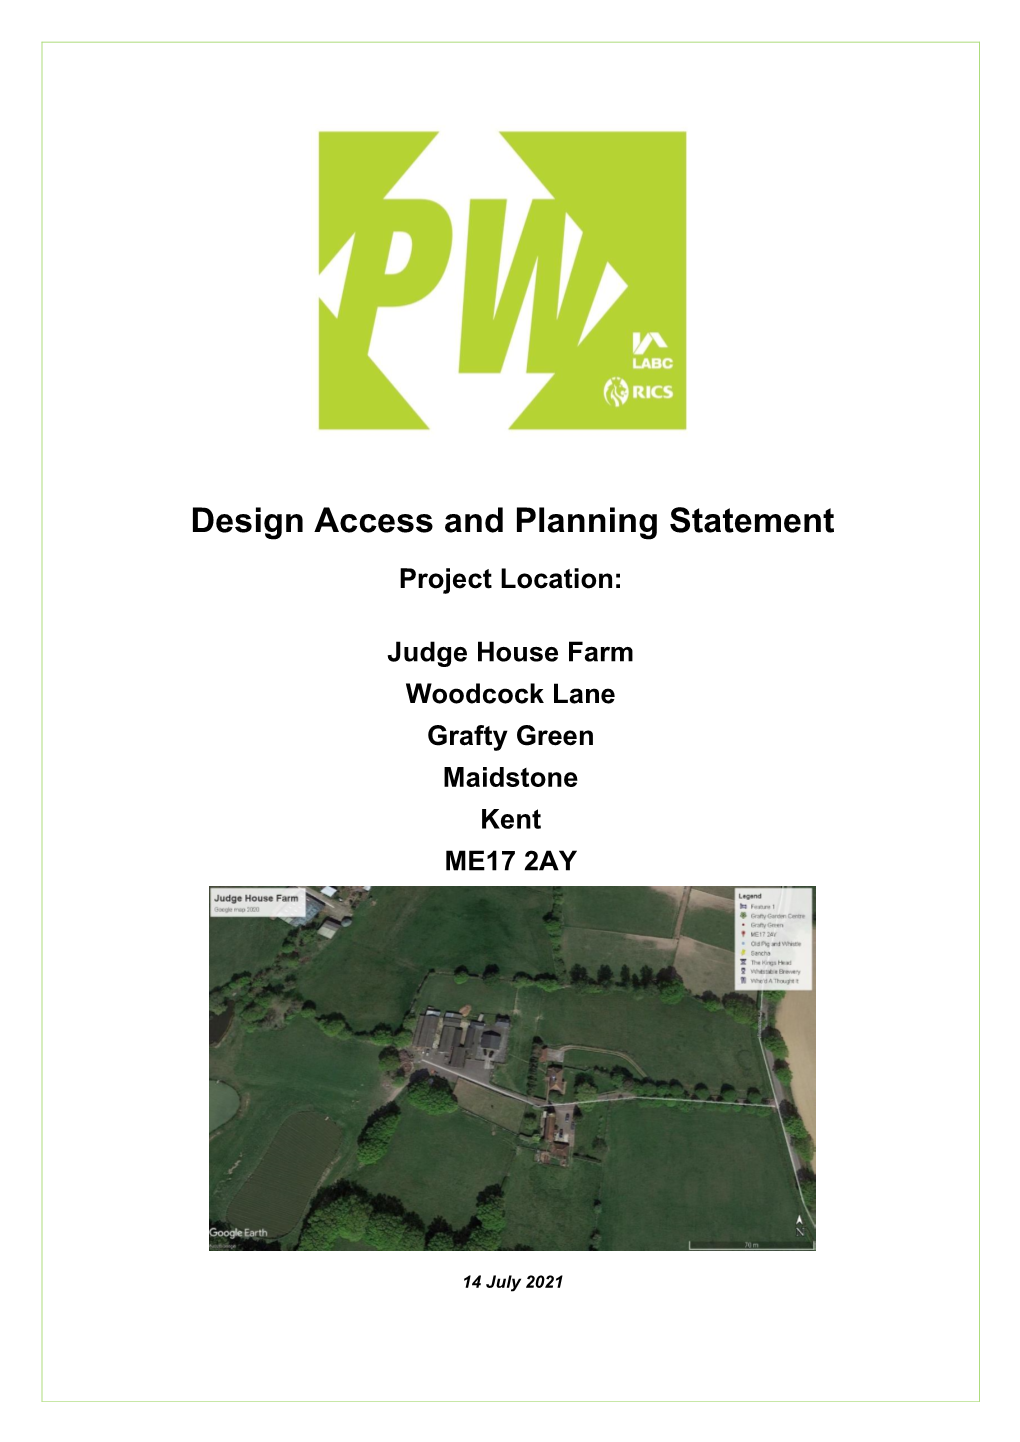 Design Access and Planning Statement Project Location